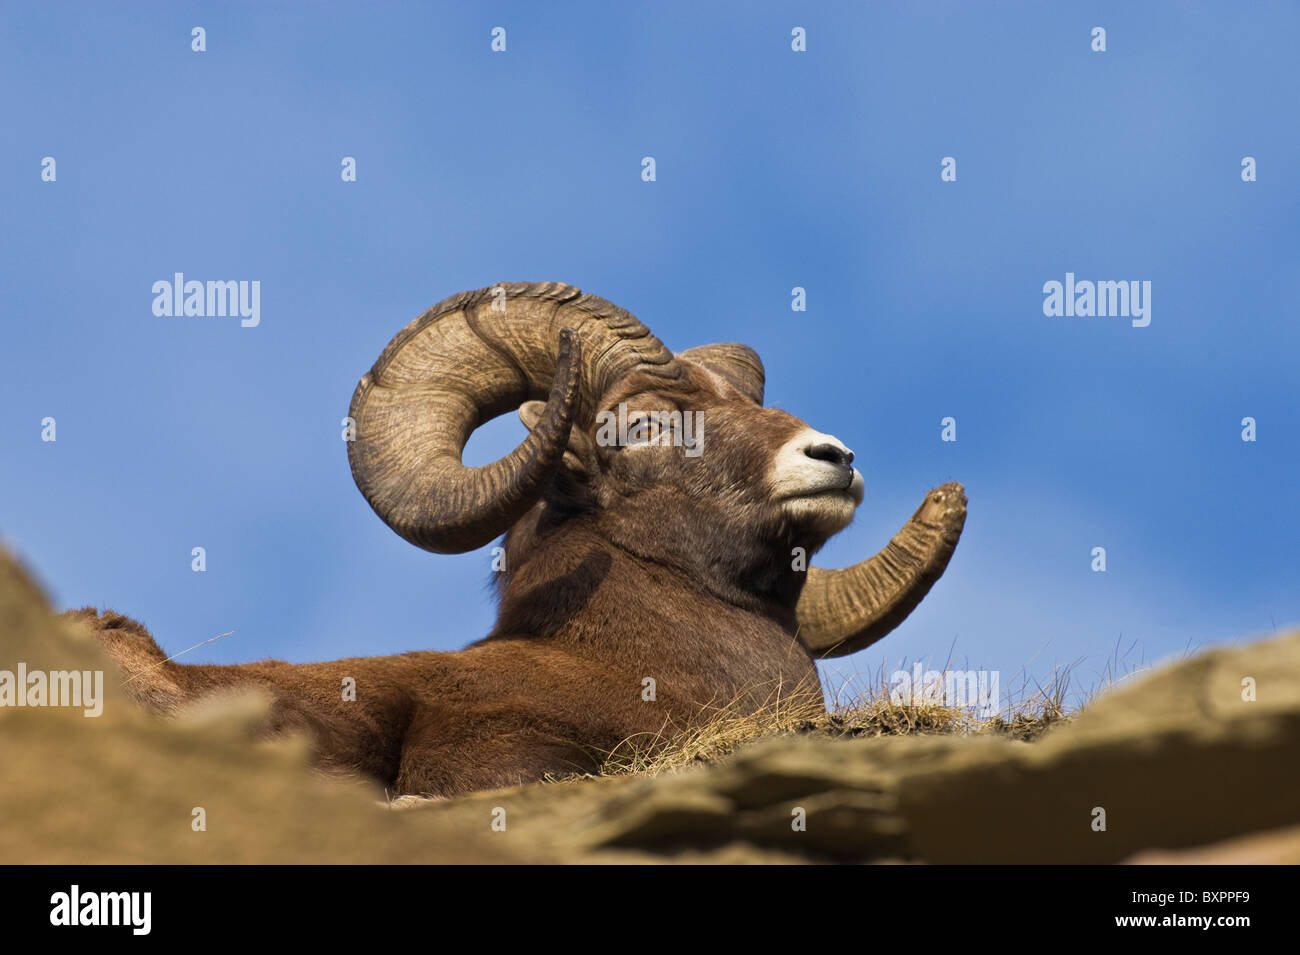 A close up portrait image of a wild Bighorn Sheep laying down Stock Photo